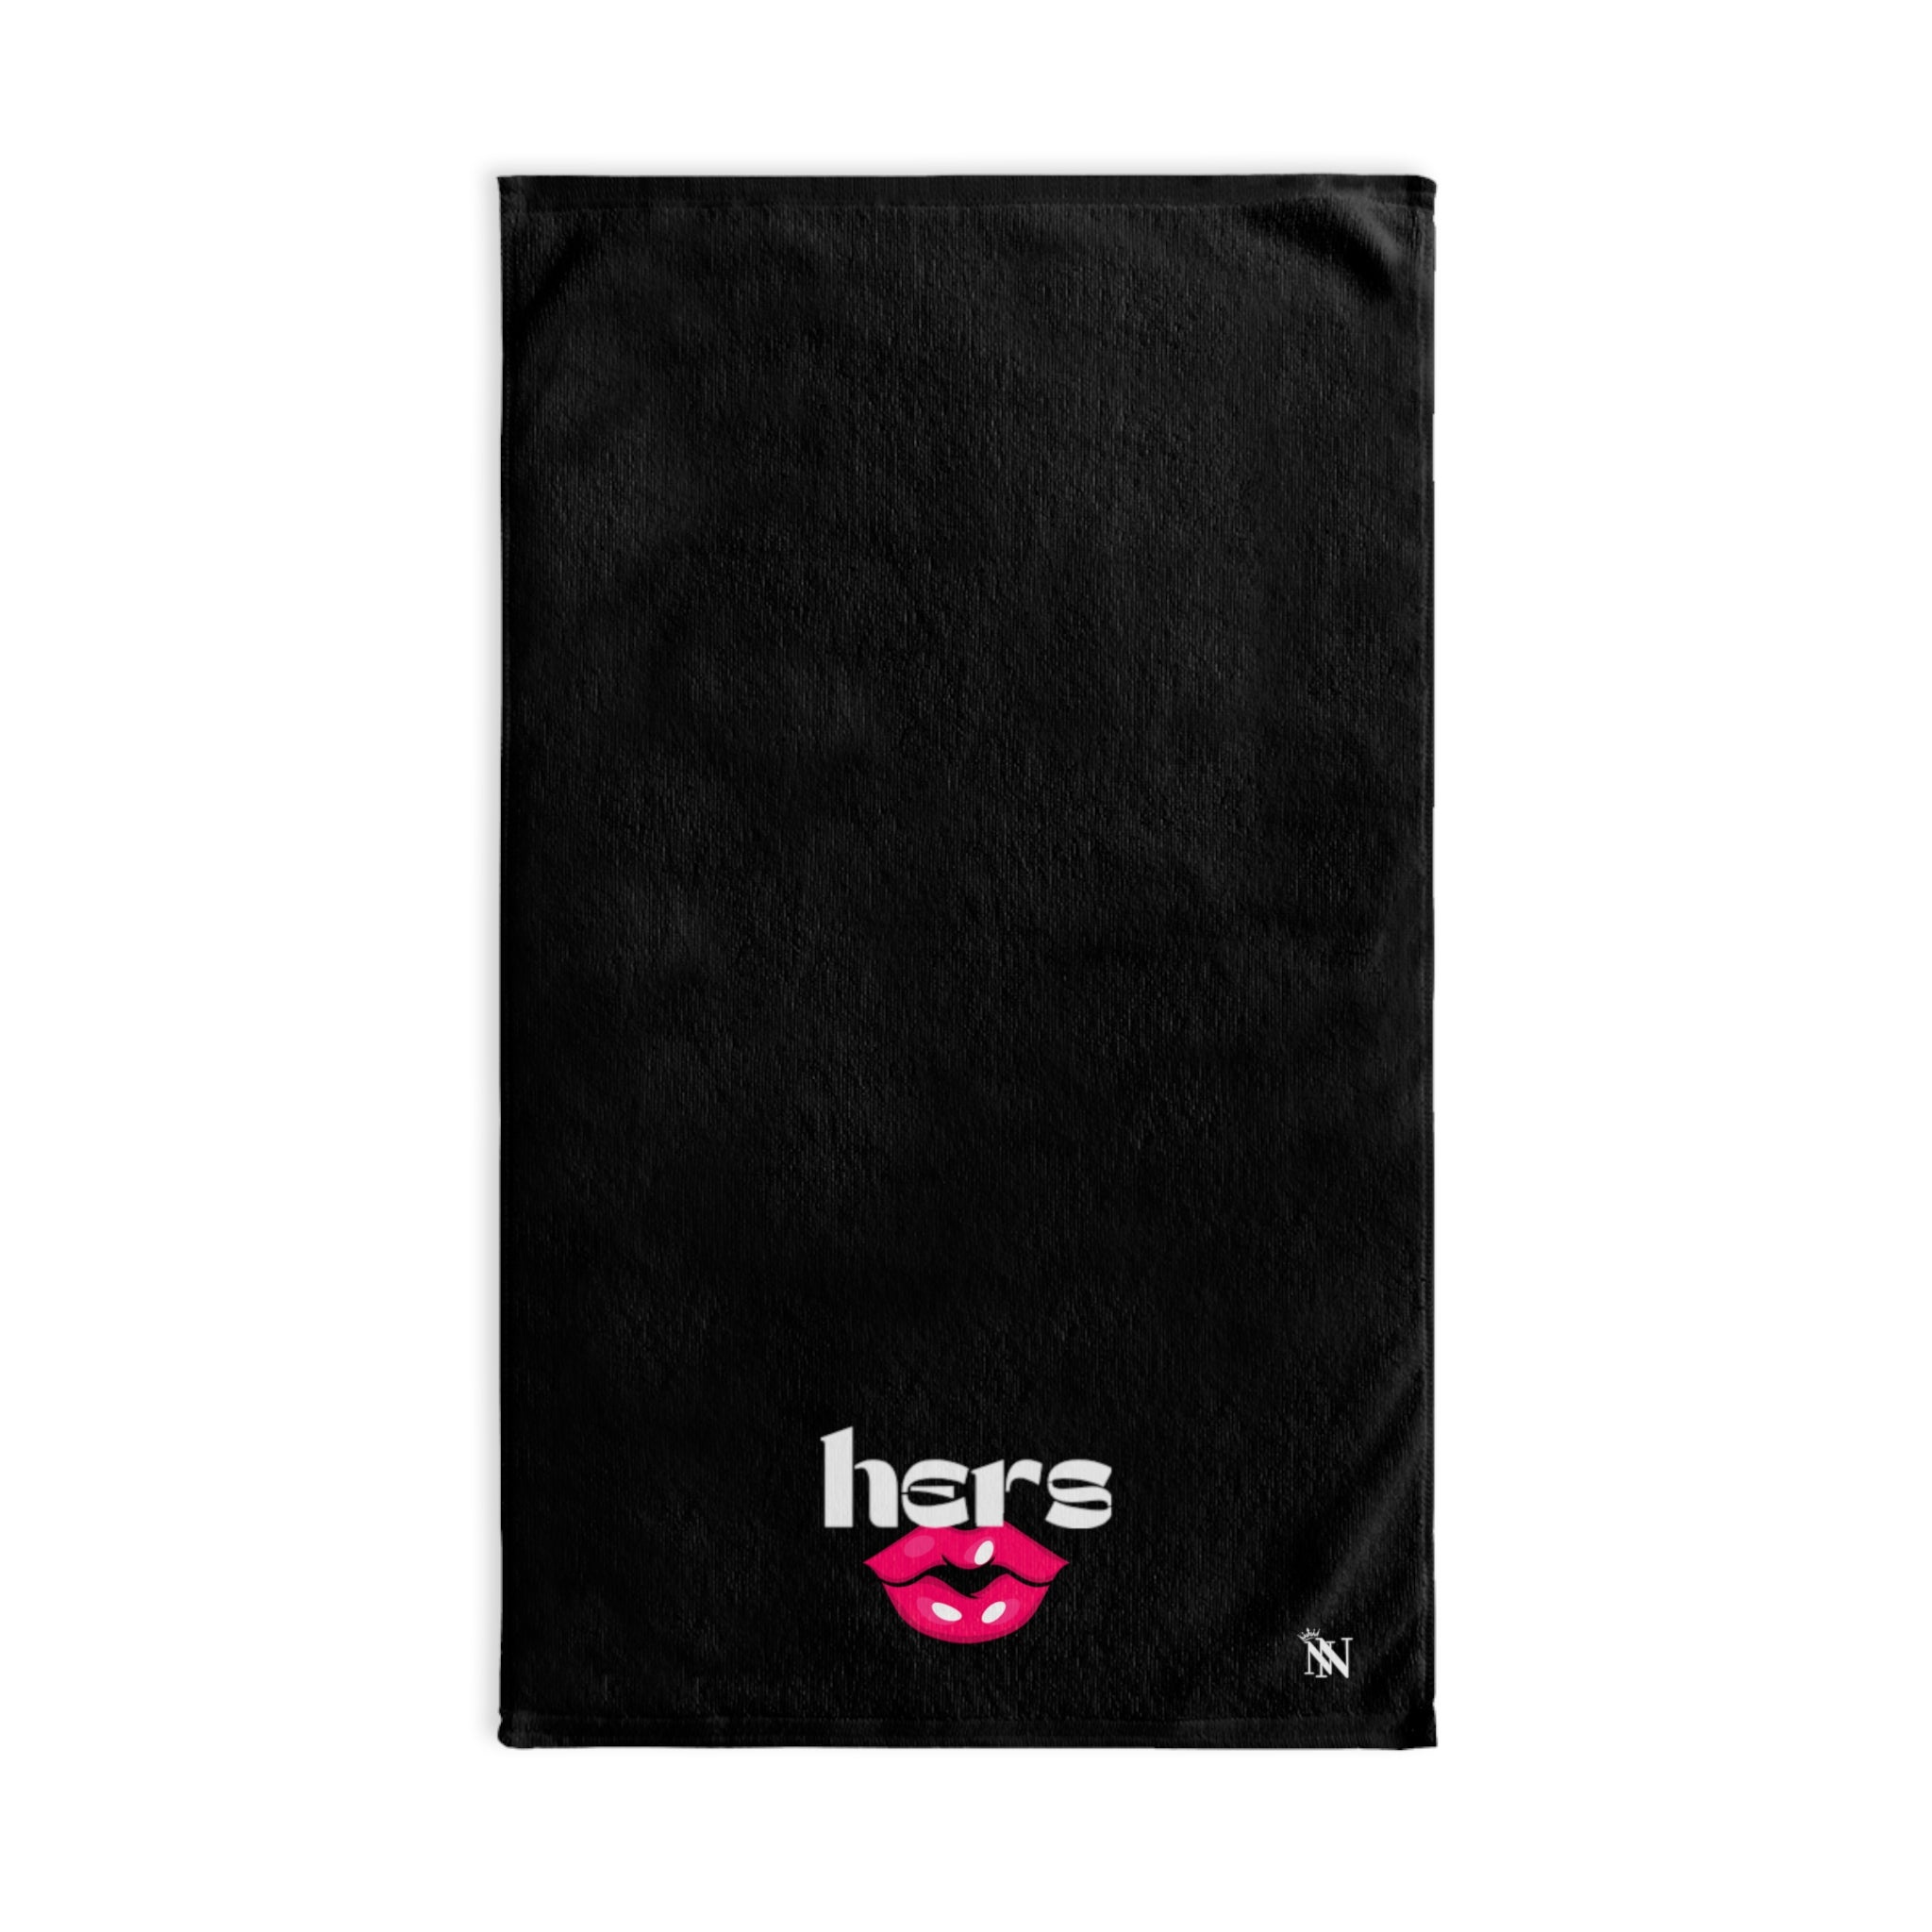 Hers Pink Lips Black | Sexy Gifts for Boyfriend, Funny Towel Romantic Gift for Wedding Couple Fiance First Year 2nd Anniversary Valentines, Party Gag Gifts, Joke Humor Cloth for Husband Men BF NECTAR NAPKINS